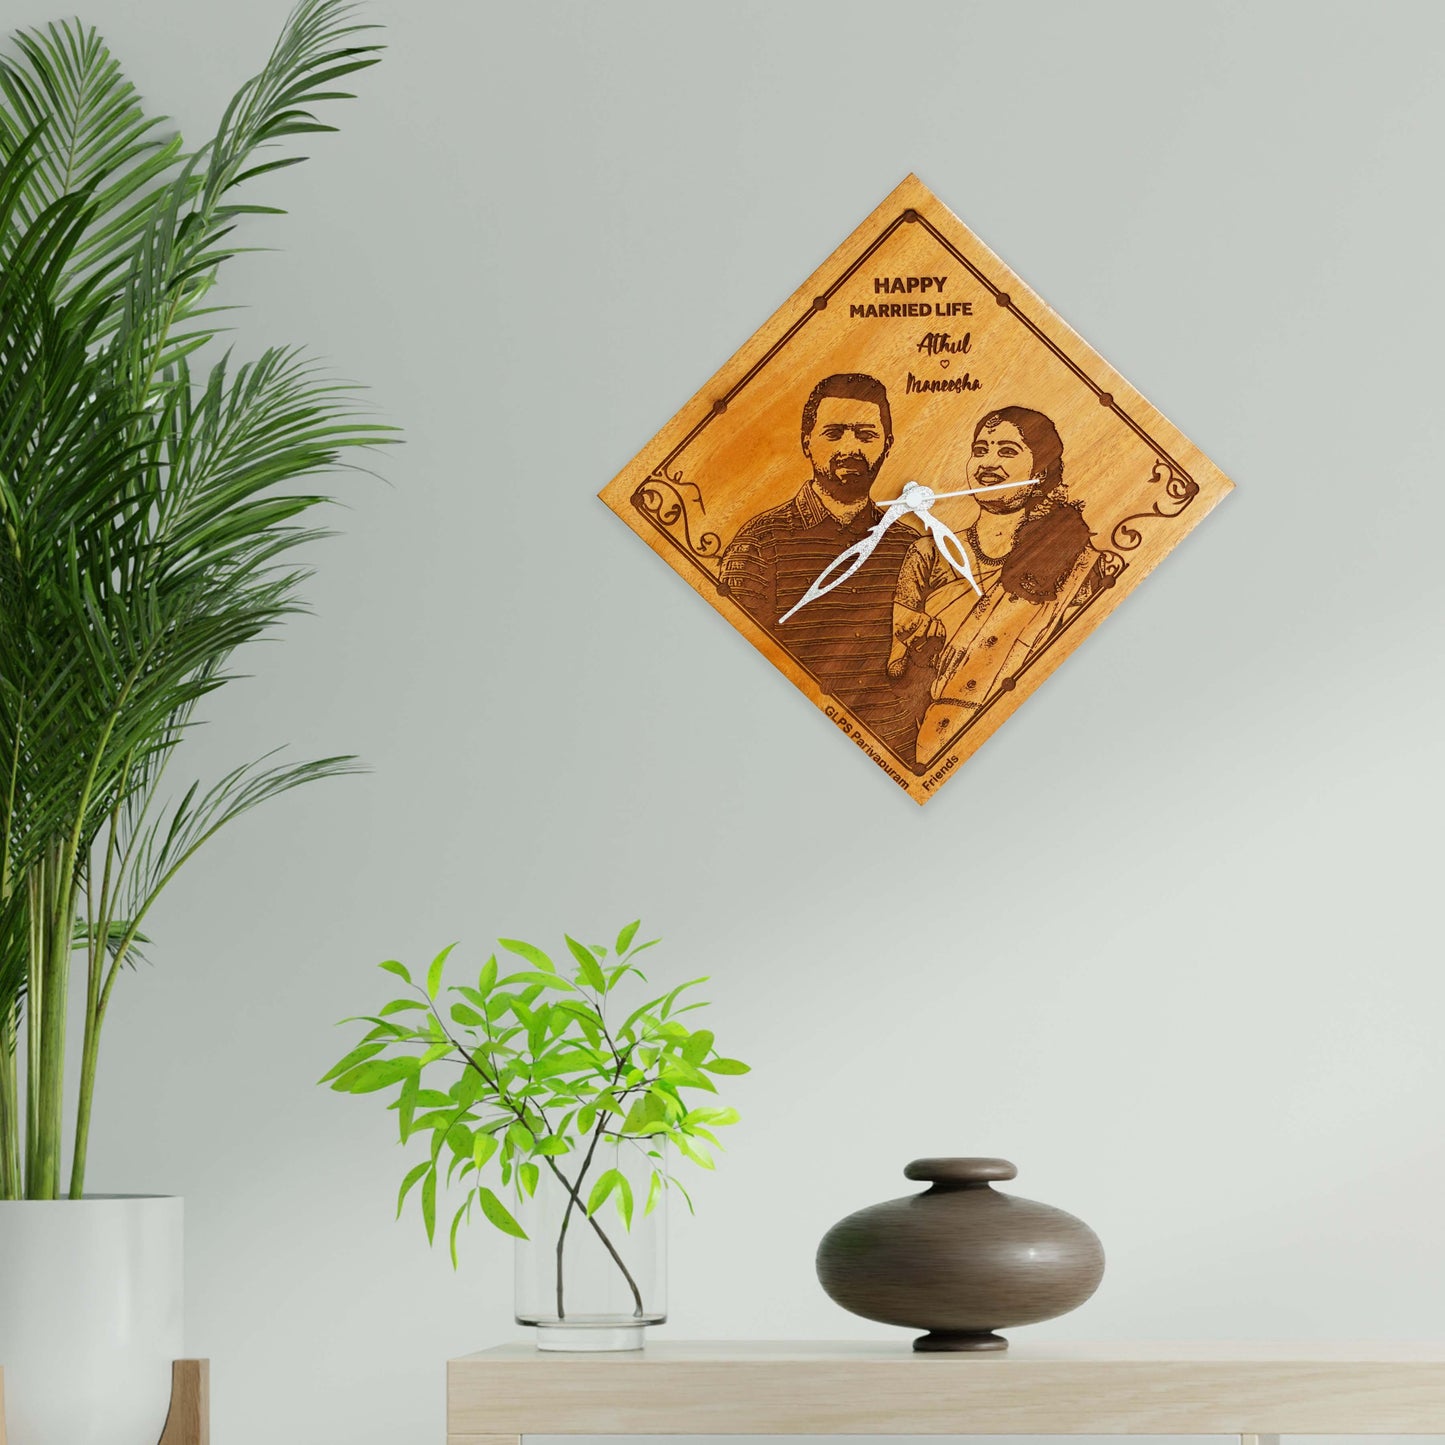 Personalized Photo Engraved Wooden Wall Clock Diamond Shape